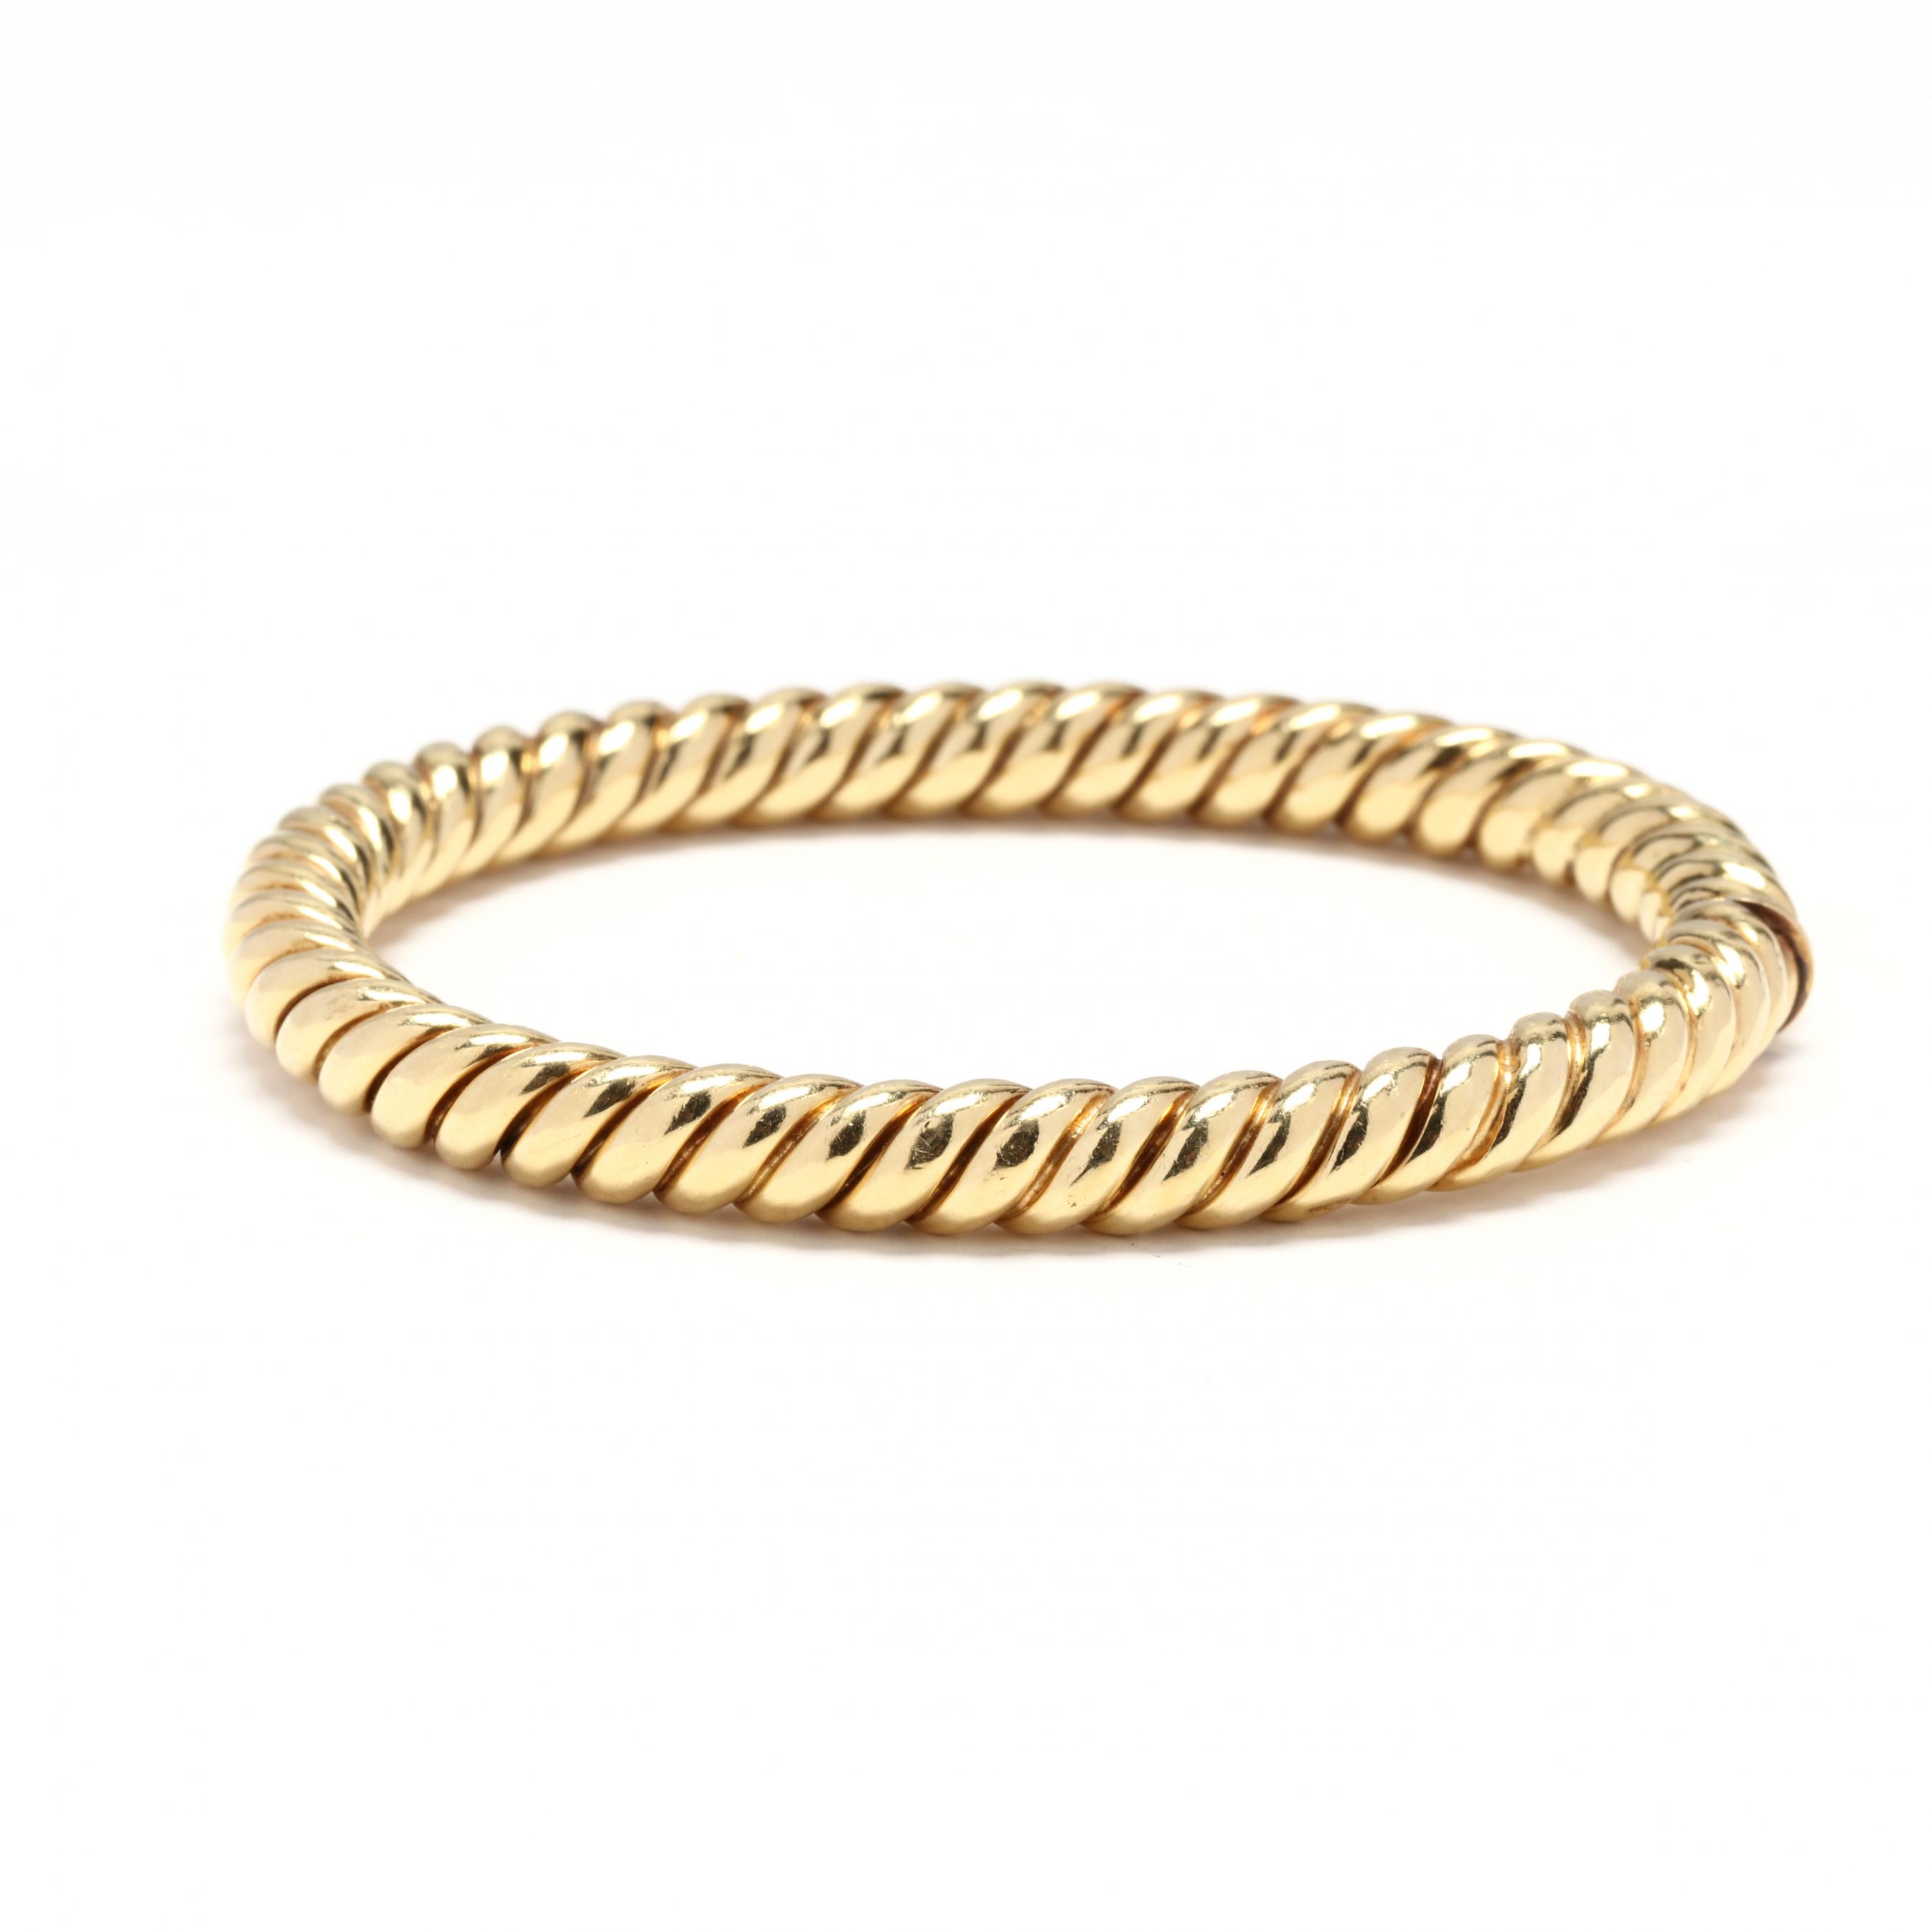 Wind & Fire Italy Boot Gold Finish Charm Bangle